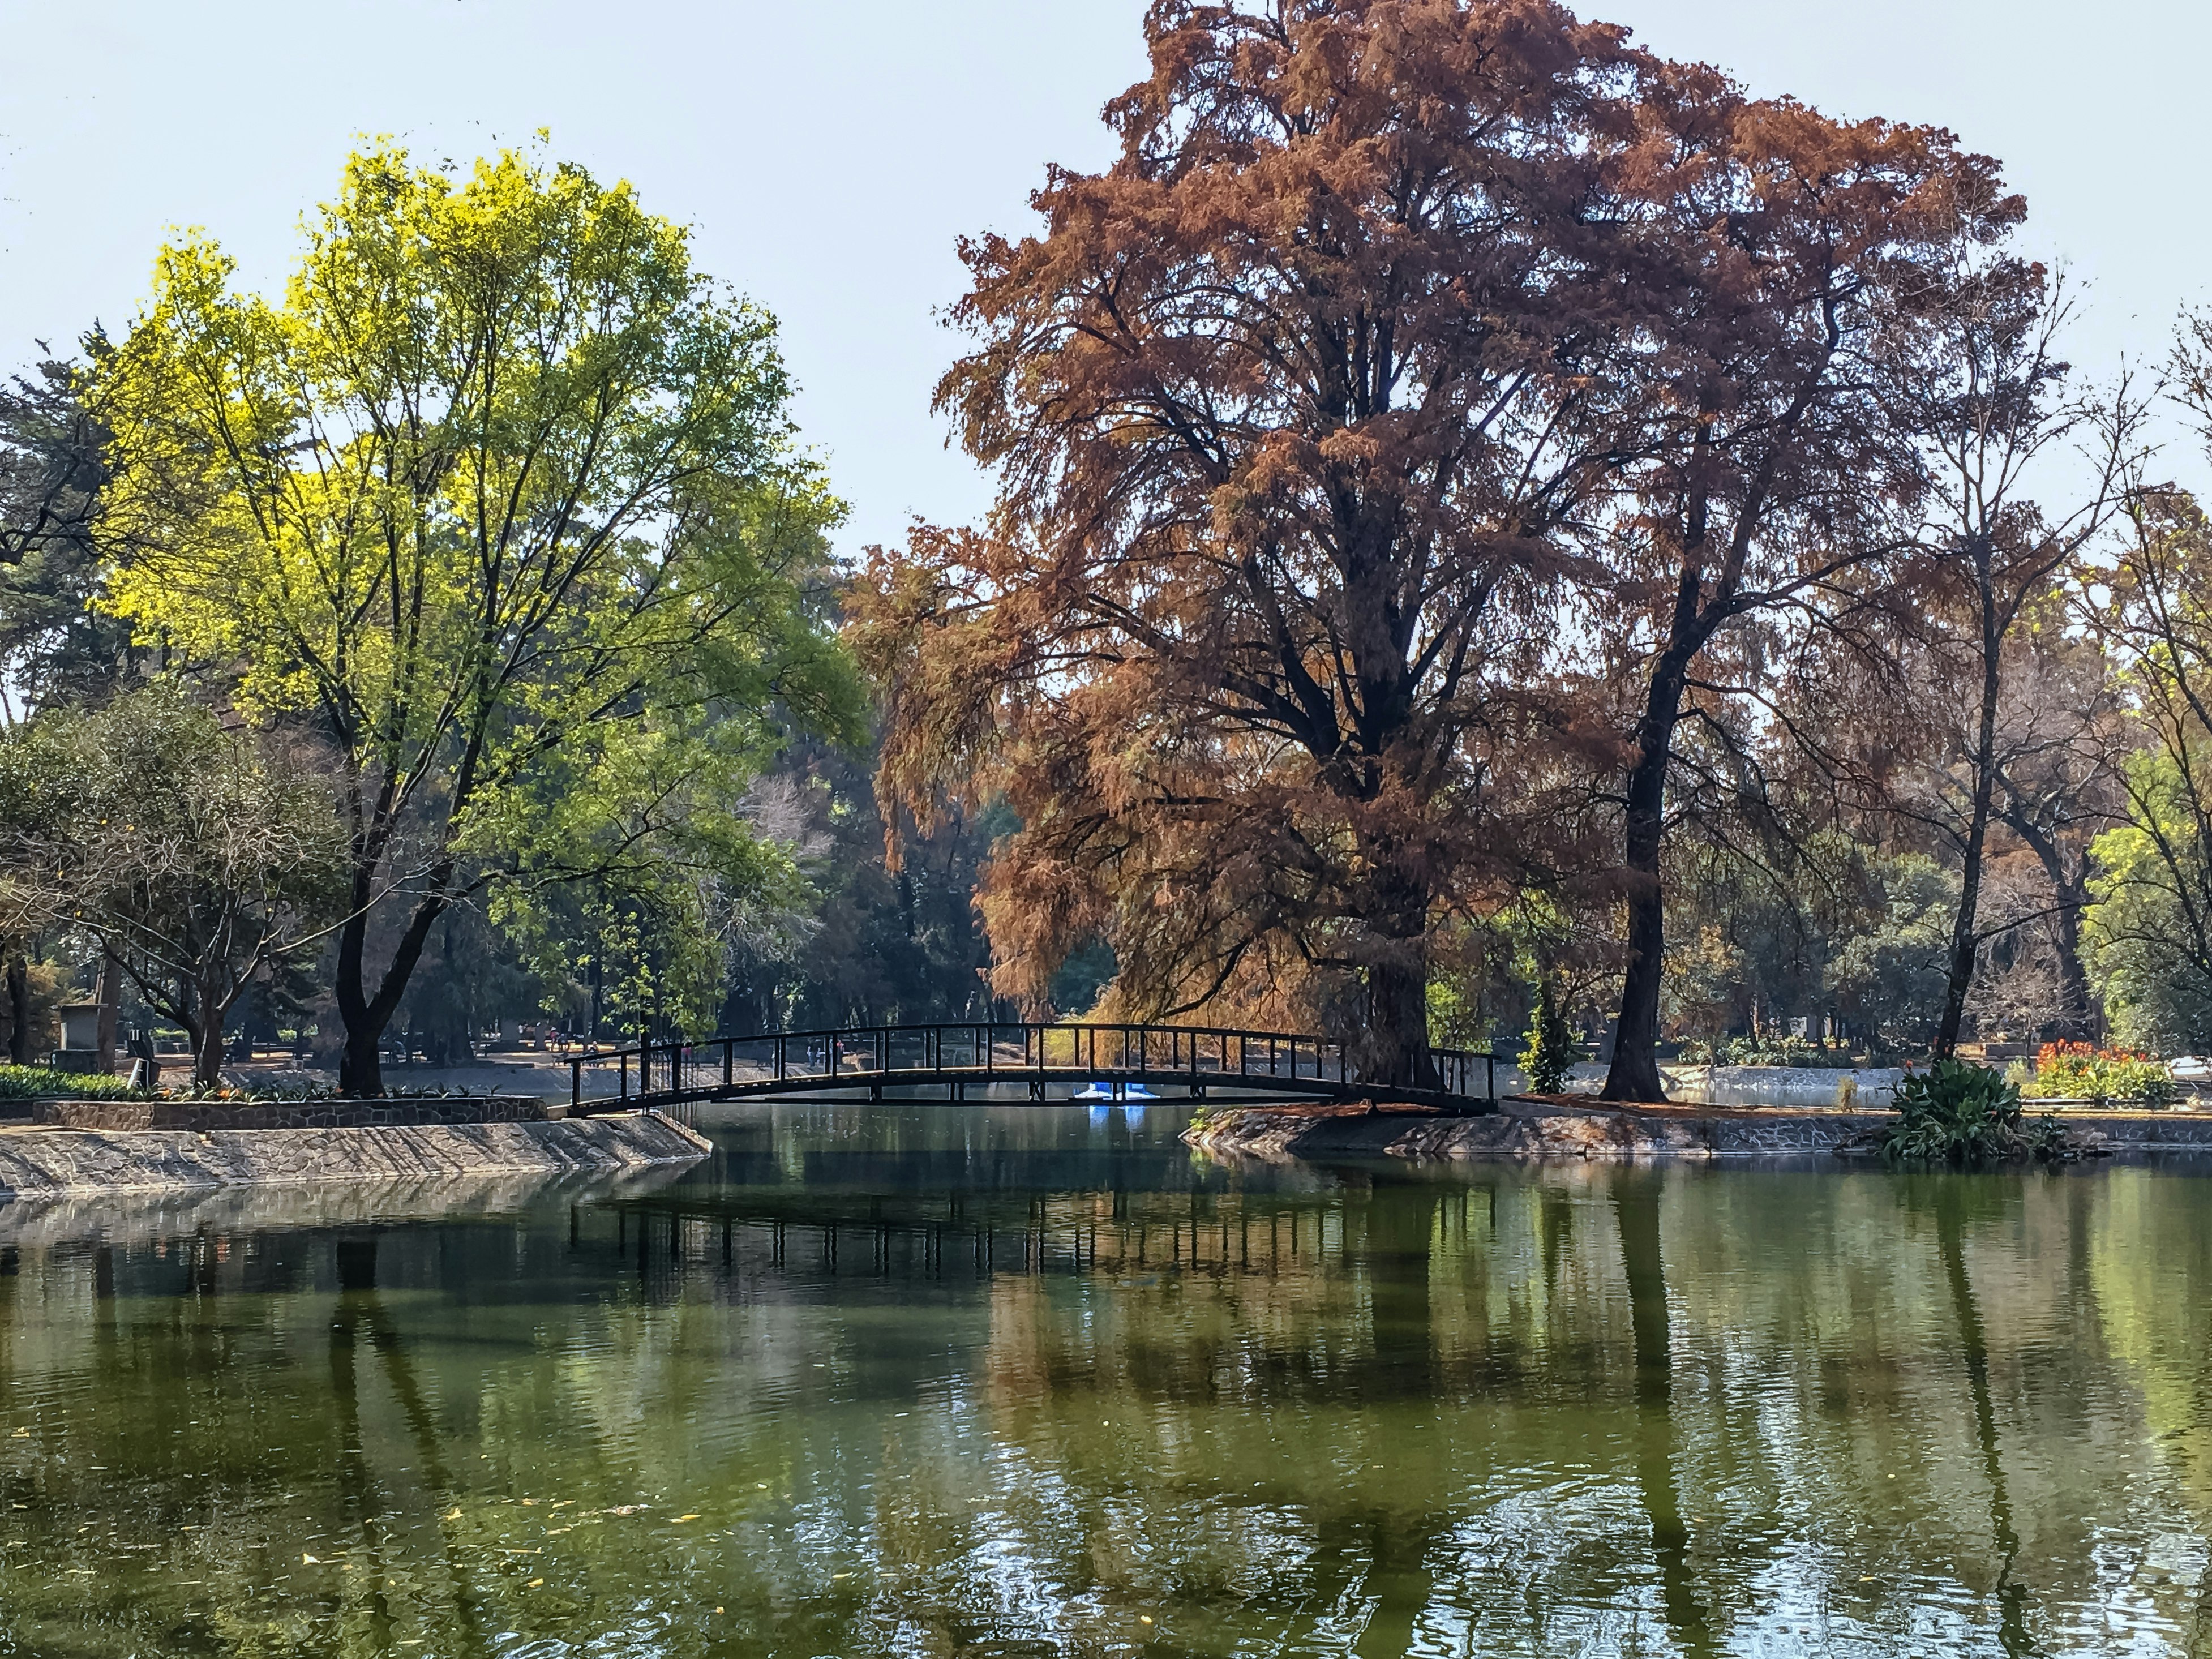 A bridge crossing to a small island on Chapultepec lake at Bosque de Chapultepec. The area is dotted with trees with colorful leaves.